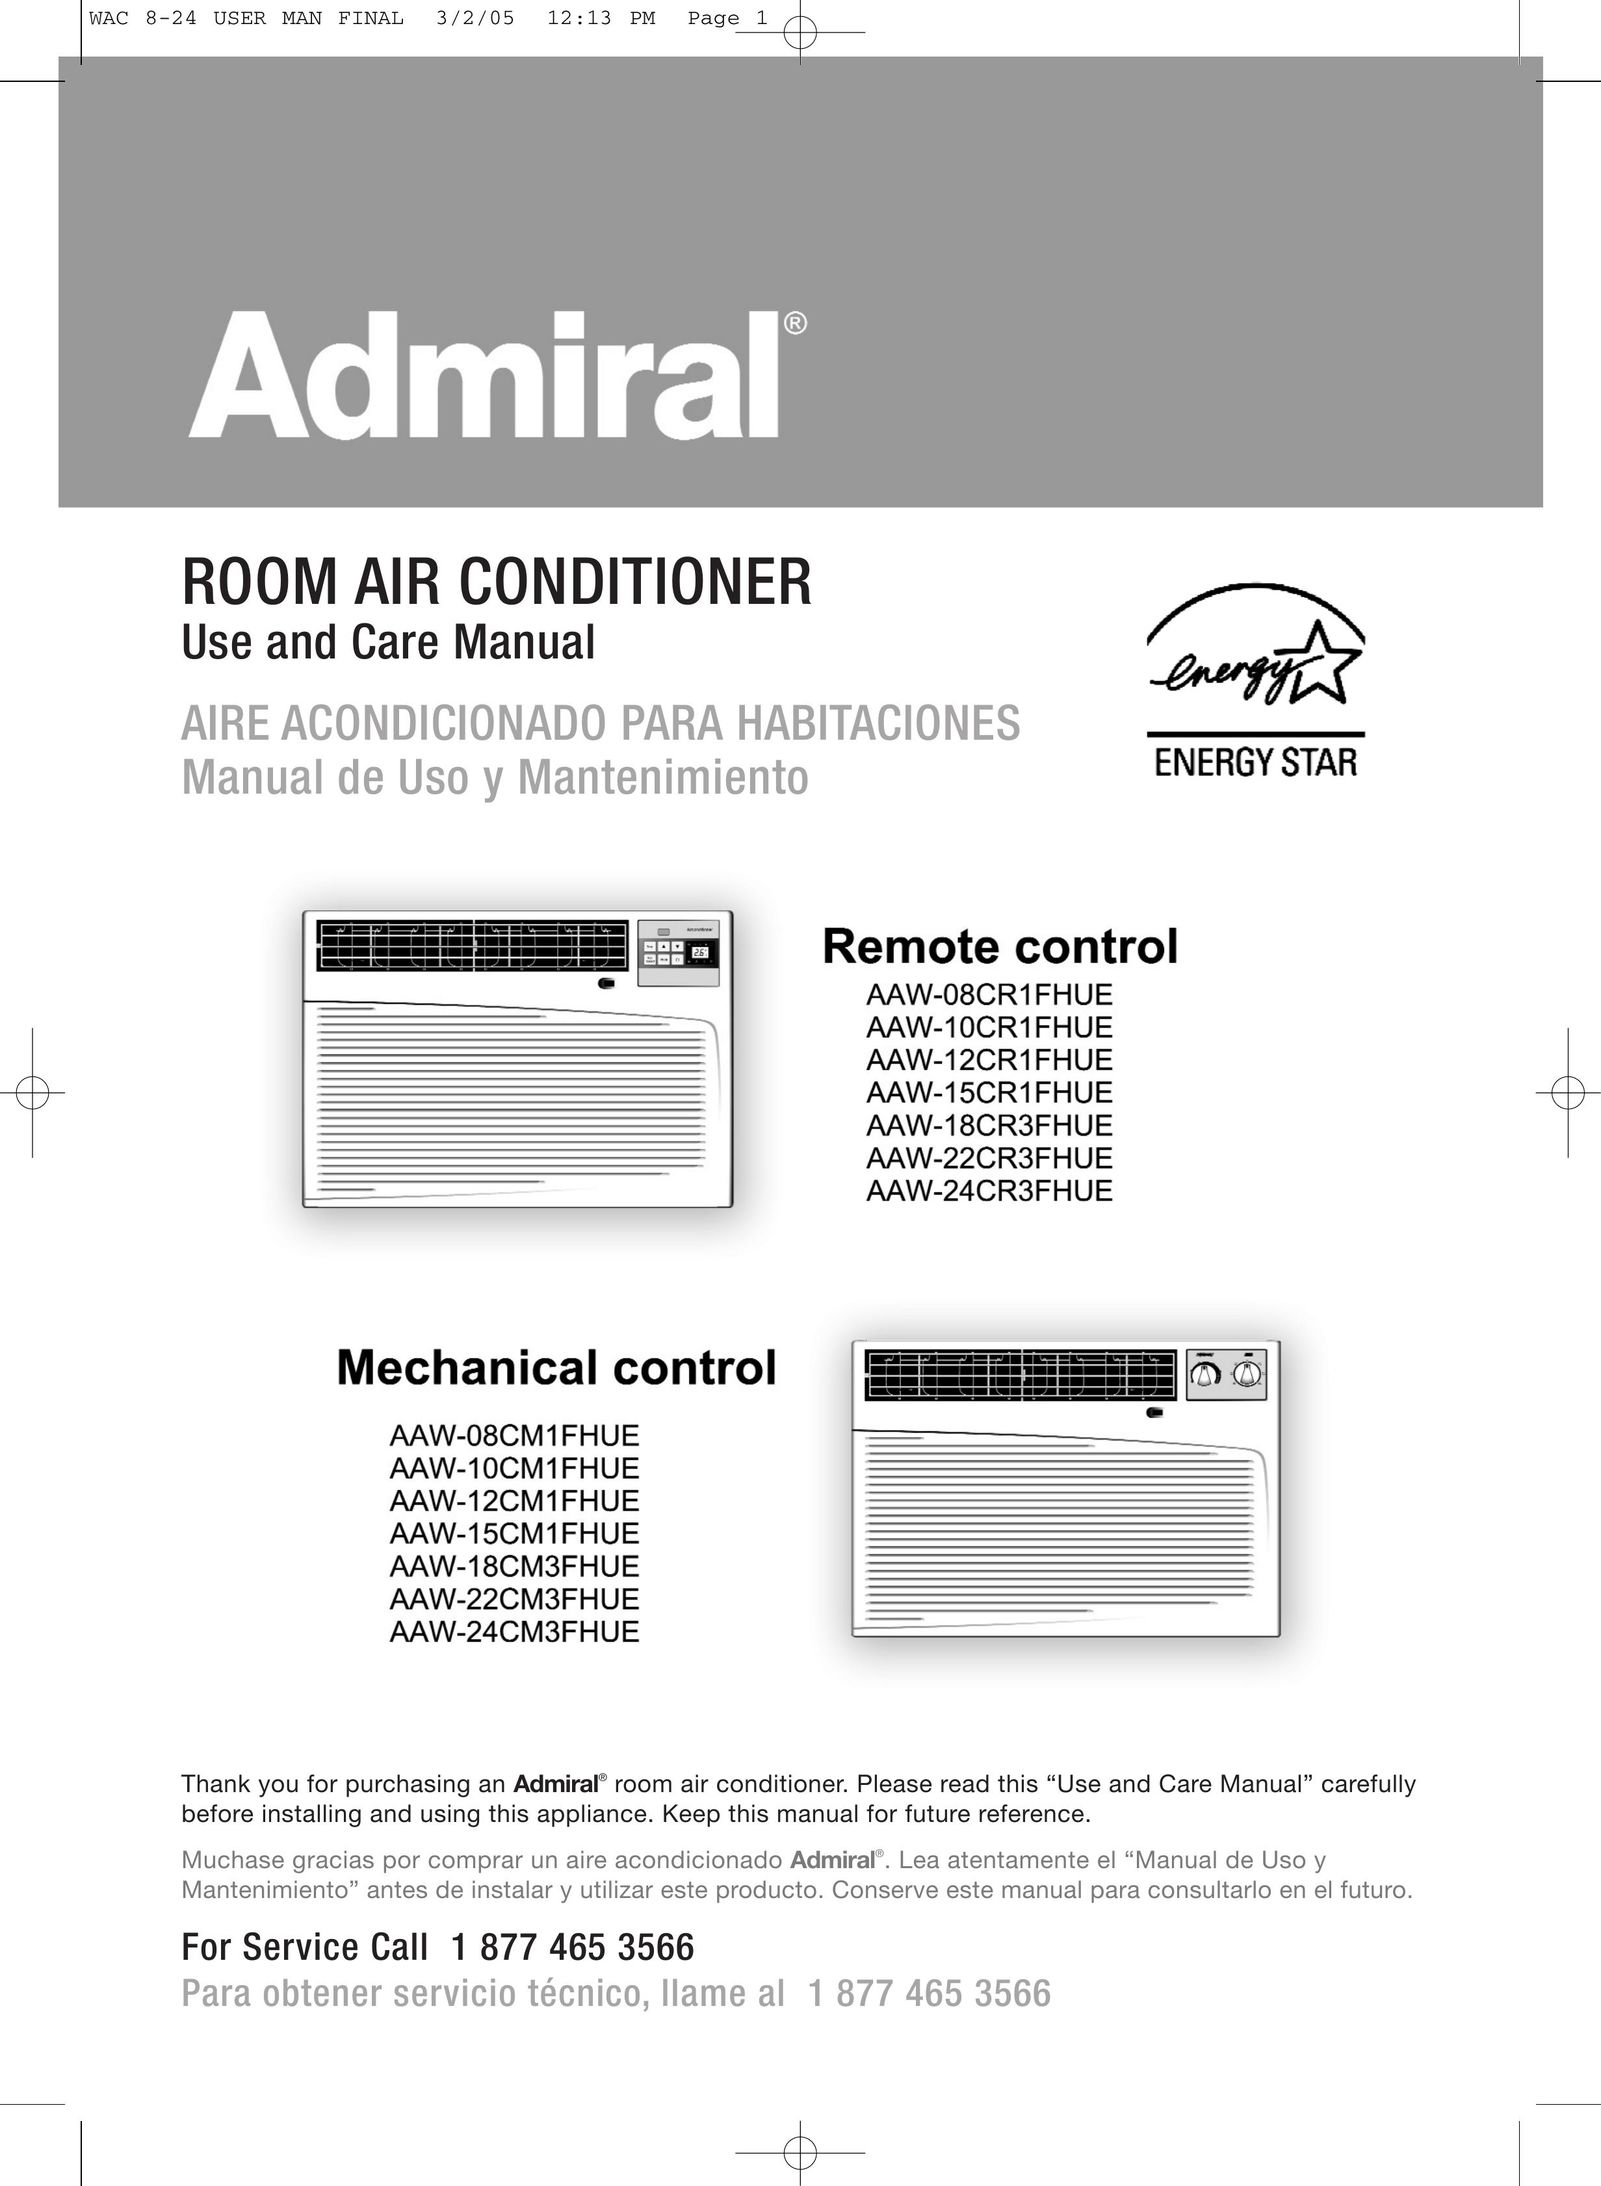 Admiral AAW-18CR1FHUE Air Conditioner User Manual (Page 1)